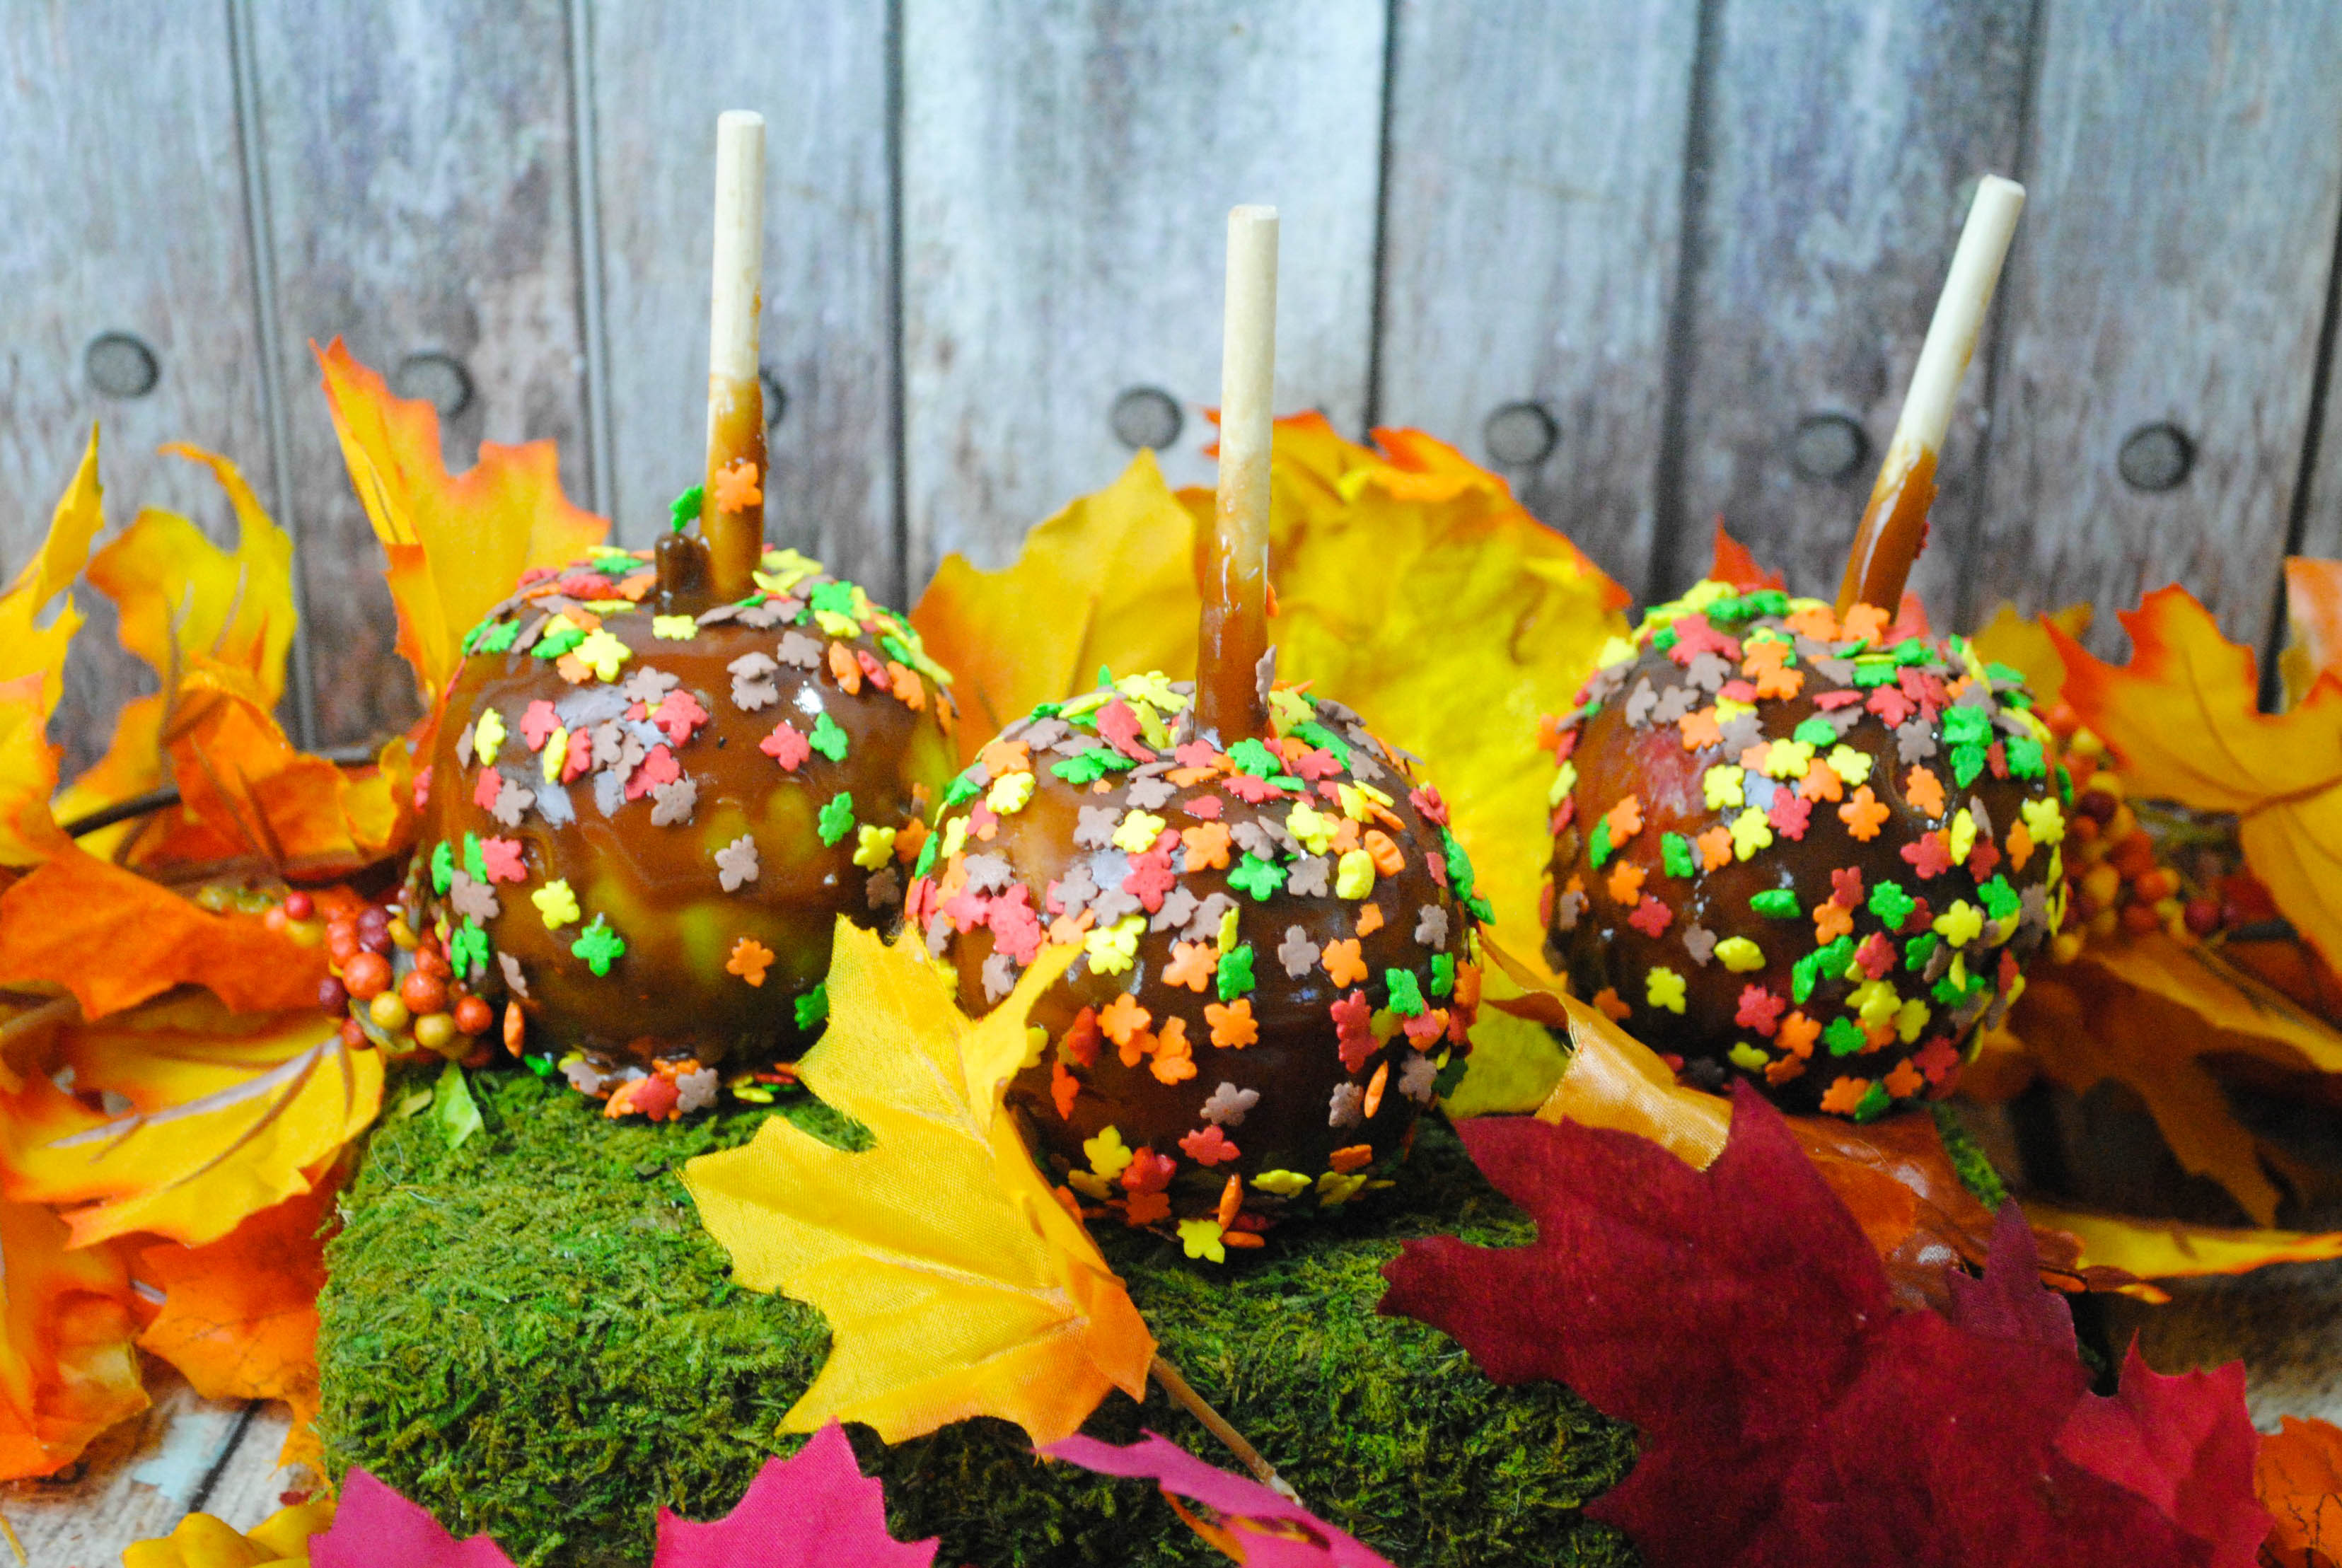 Love caramel apples This pumpkin spice caramel apple will be an amazing treat for anyone this fall. 